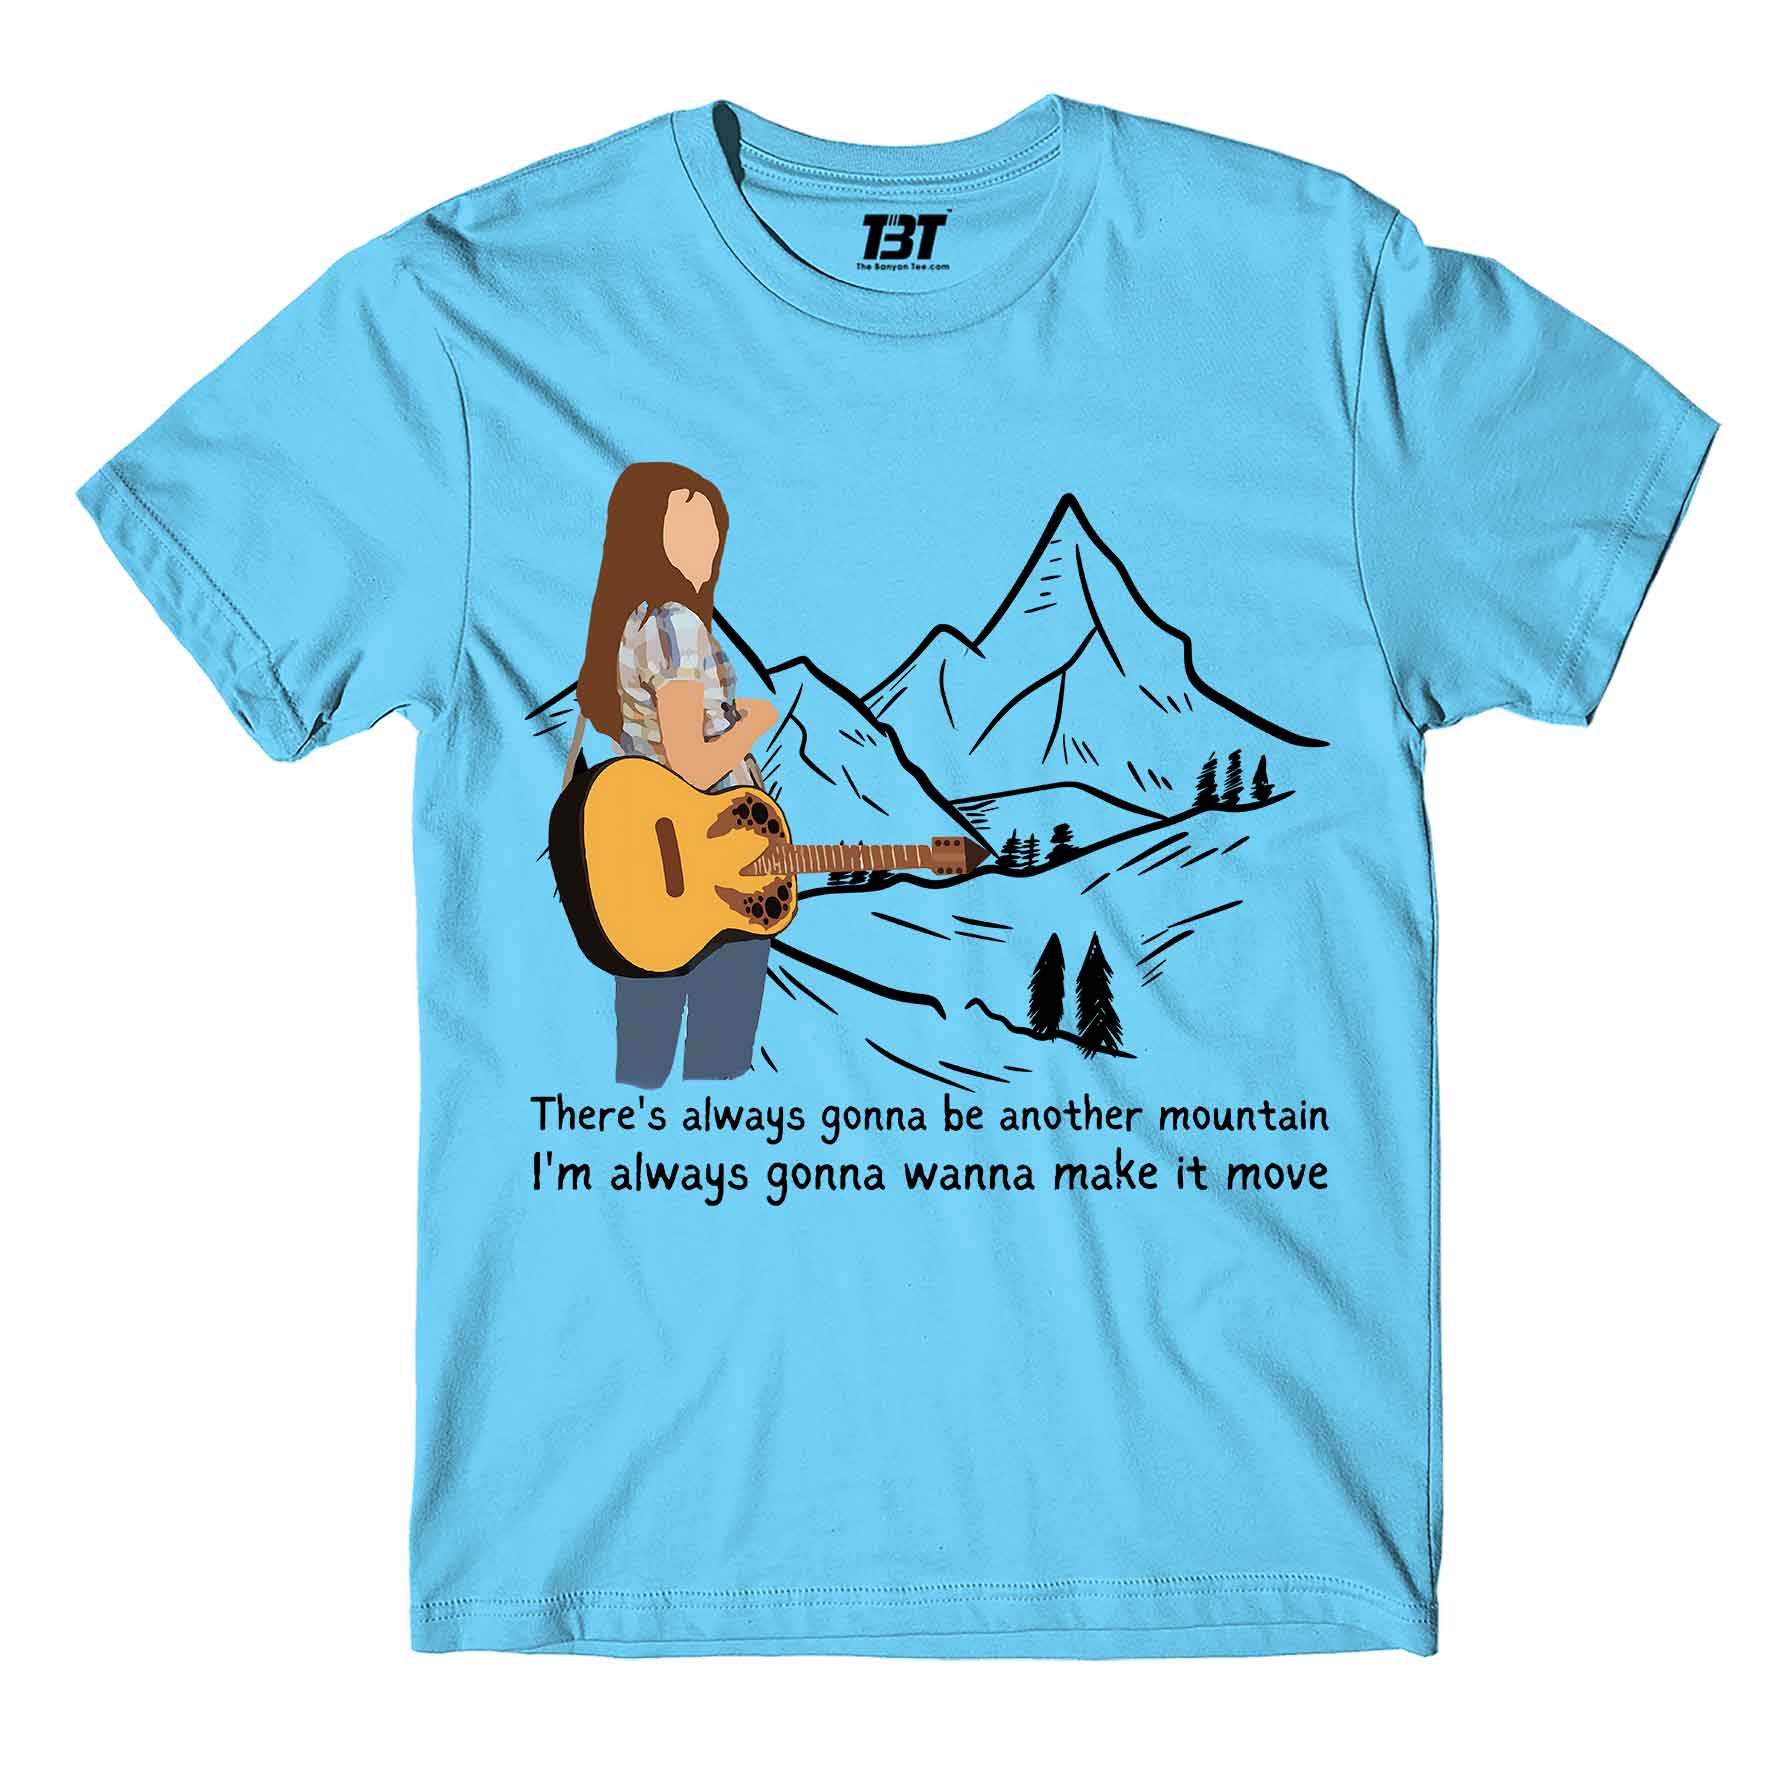 miley cyrus the climb t-shirt music band buy online india the banyan tee tbt men women girls boys unisex white there's always gonna be another mountain i am always gonna wanna make it move